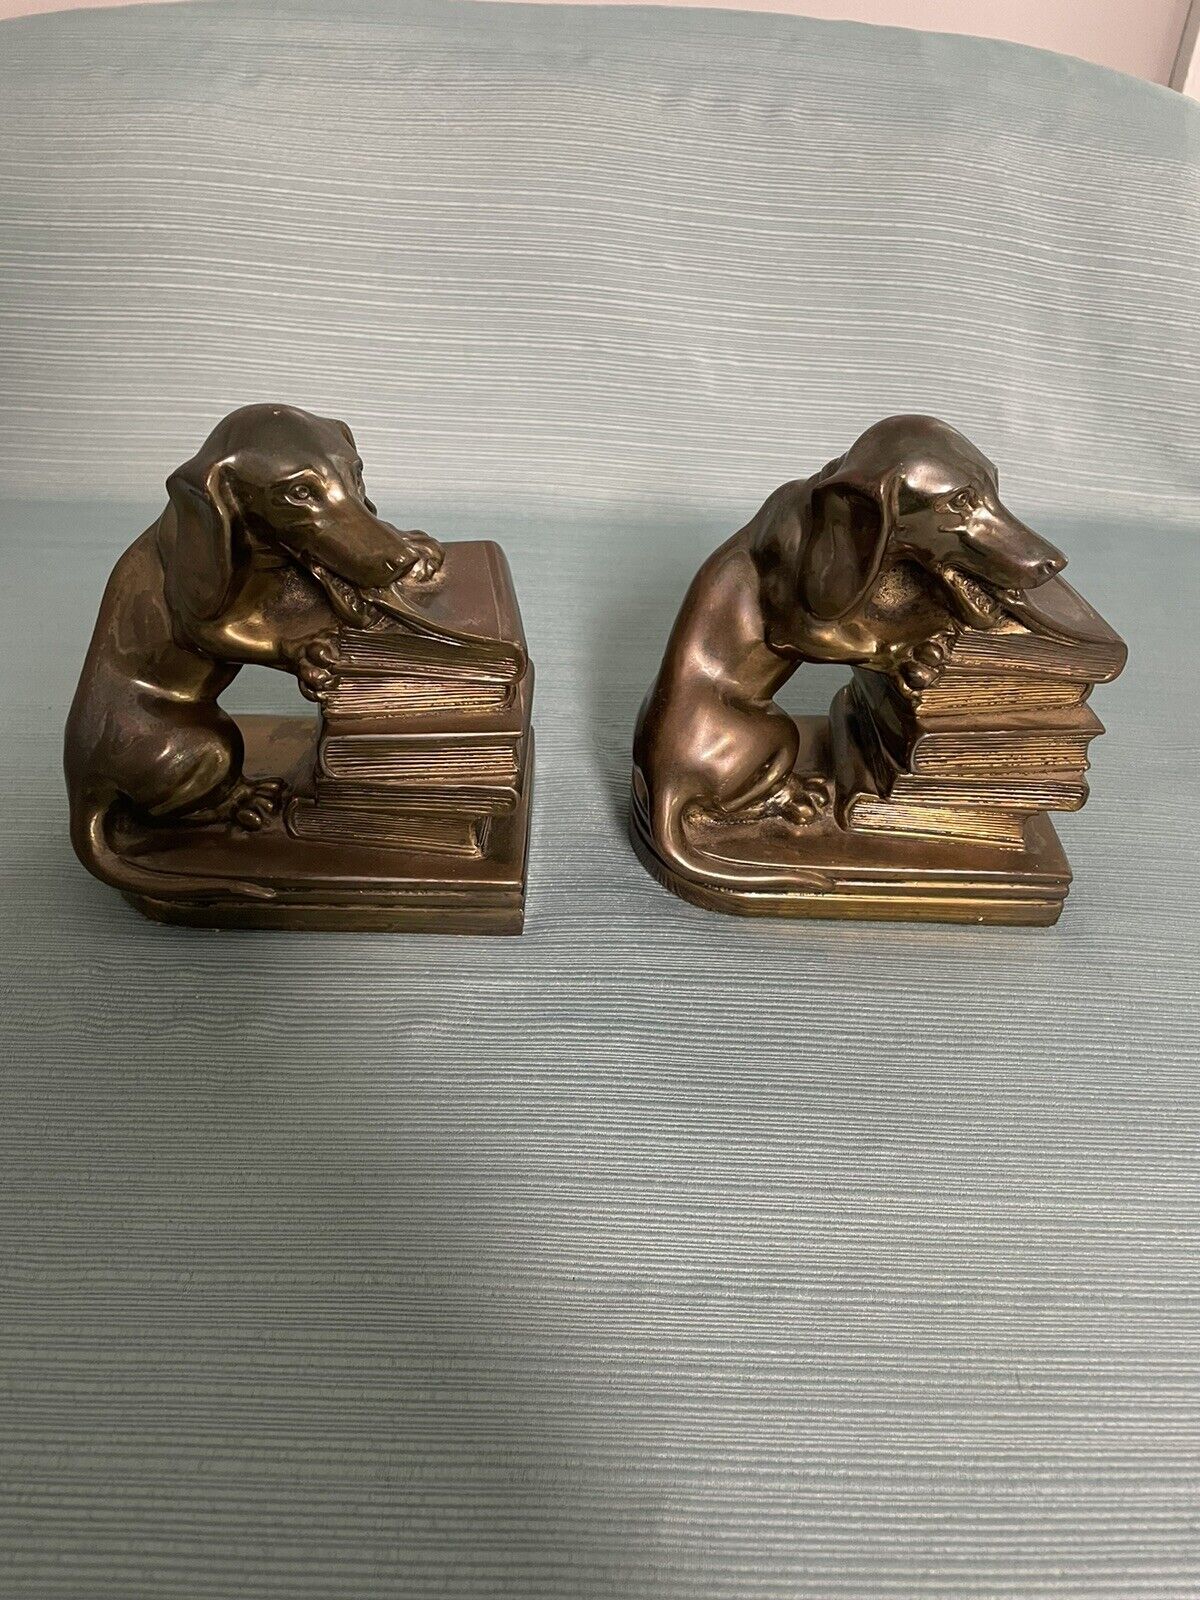 Vintage Jenning Bros Dachshund Bookends Signed JB 1700 Dog Chewing on Books